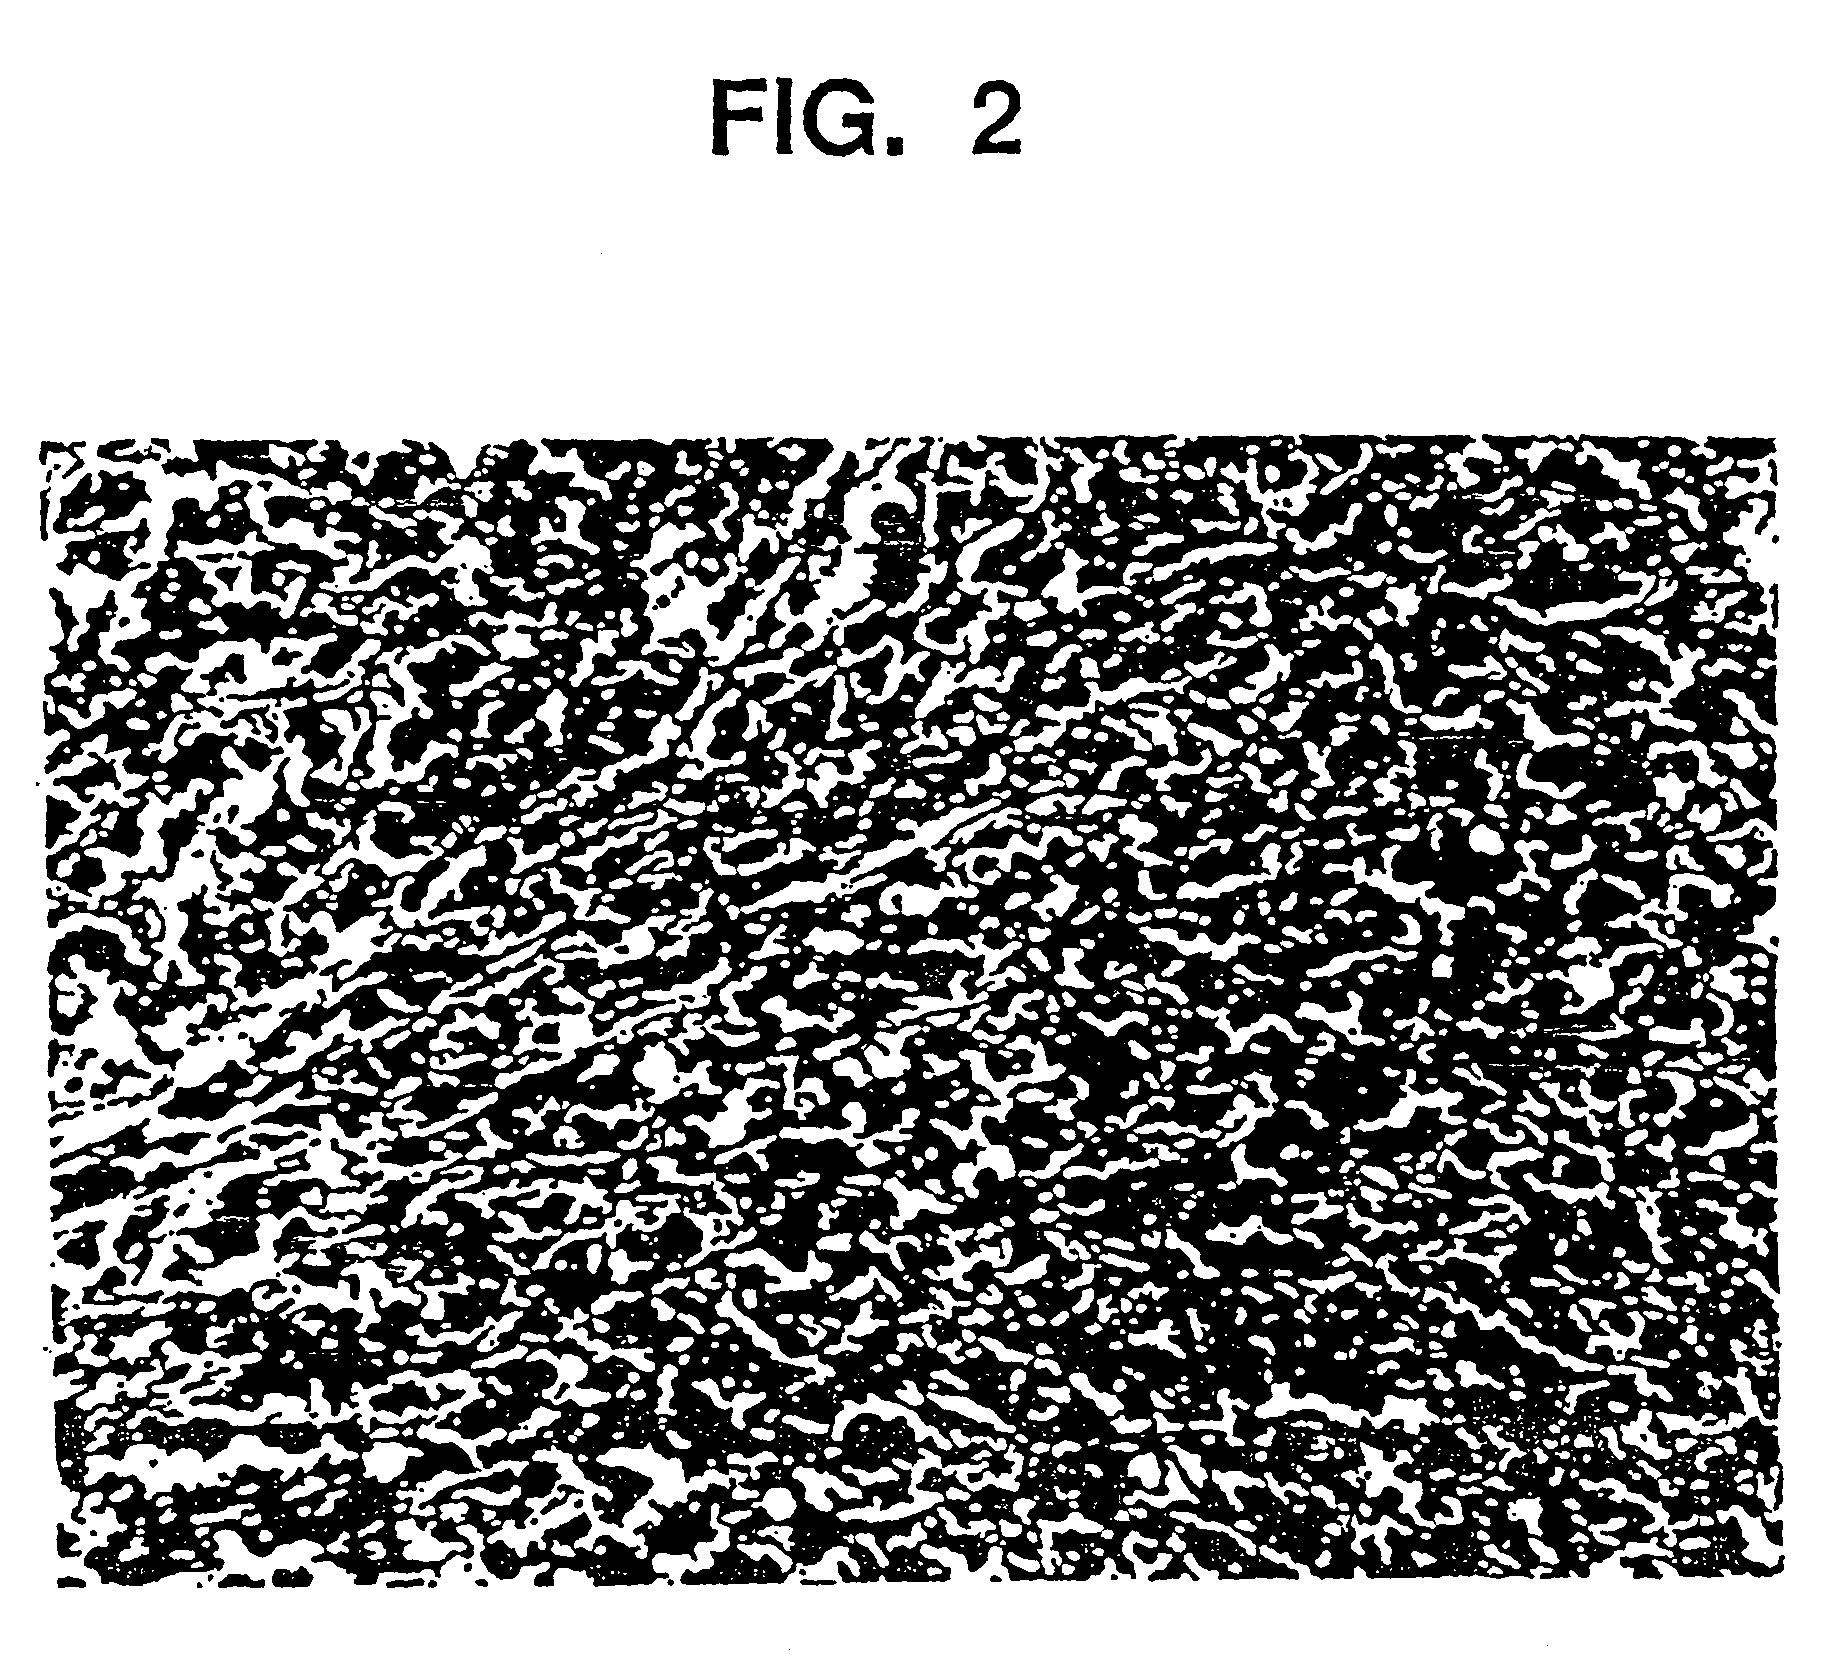 Tissue augmentation material and method